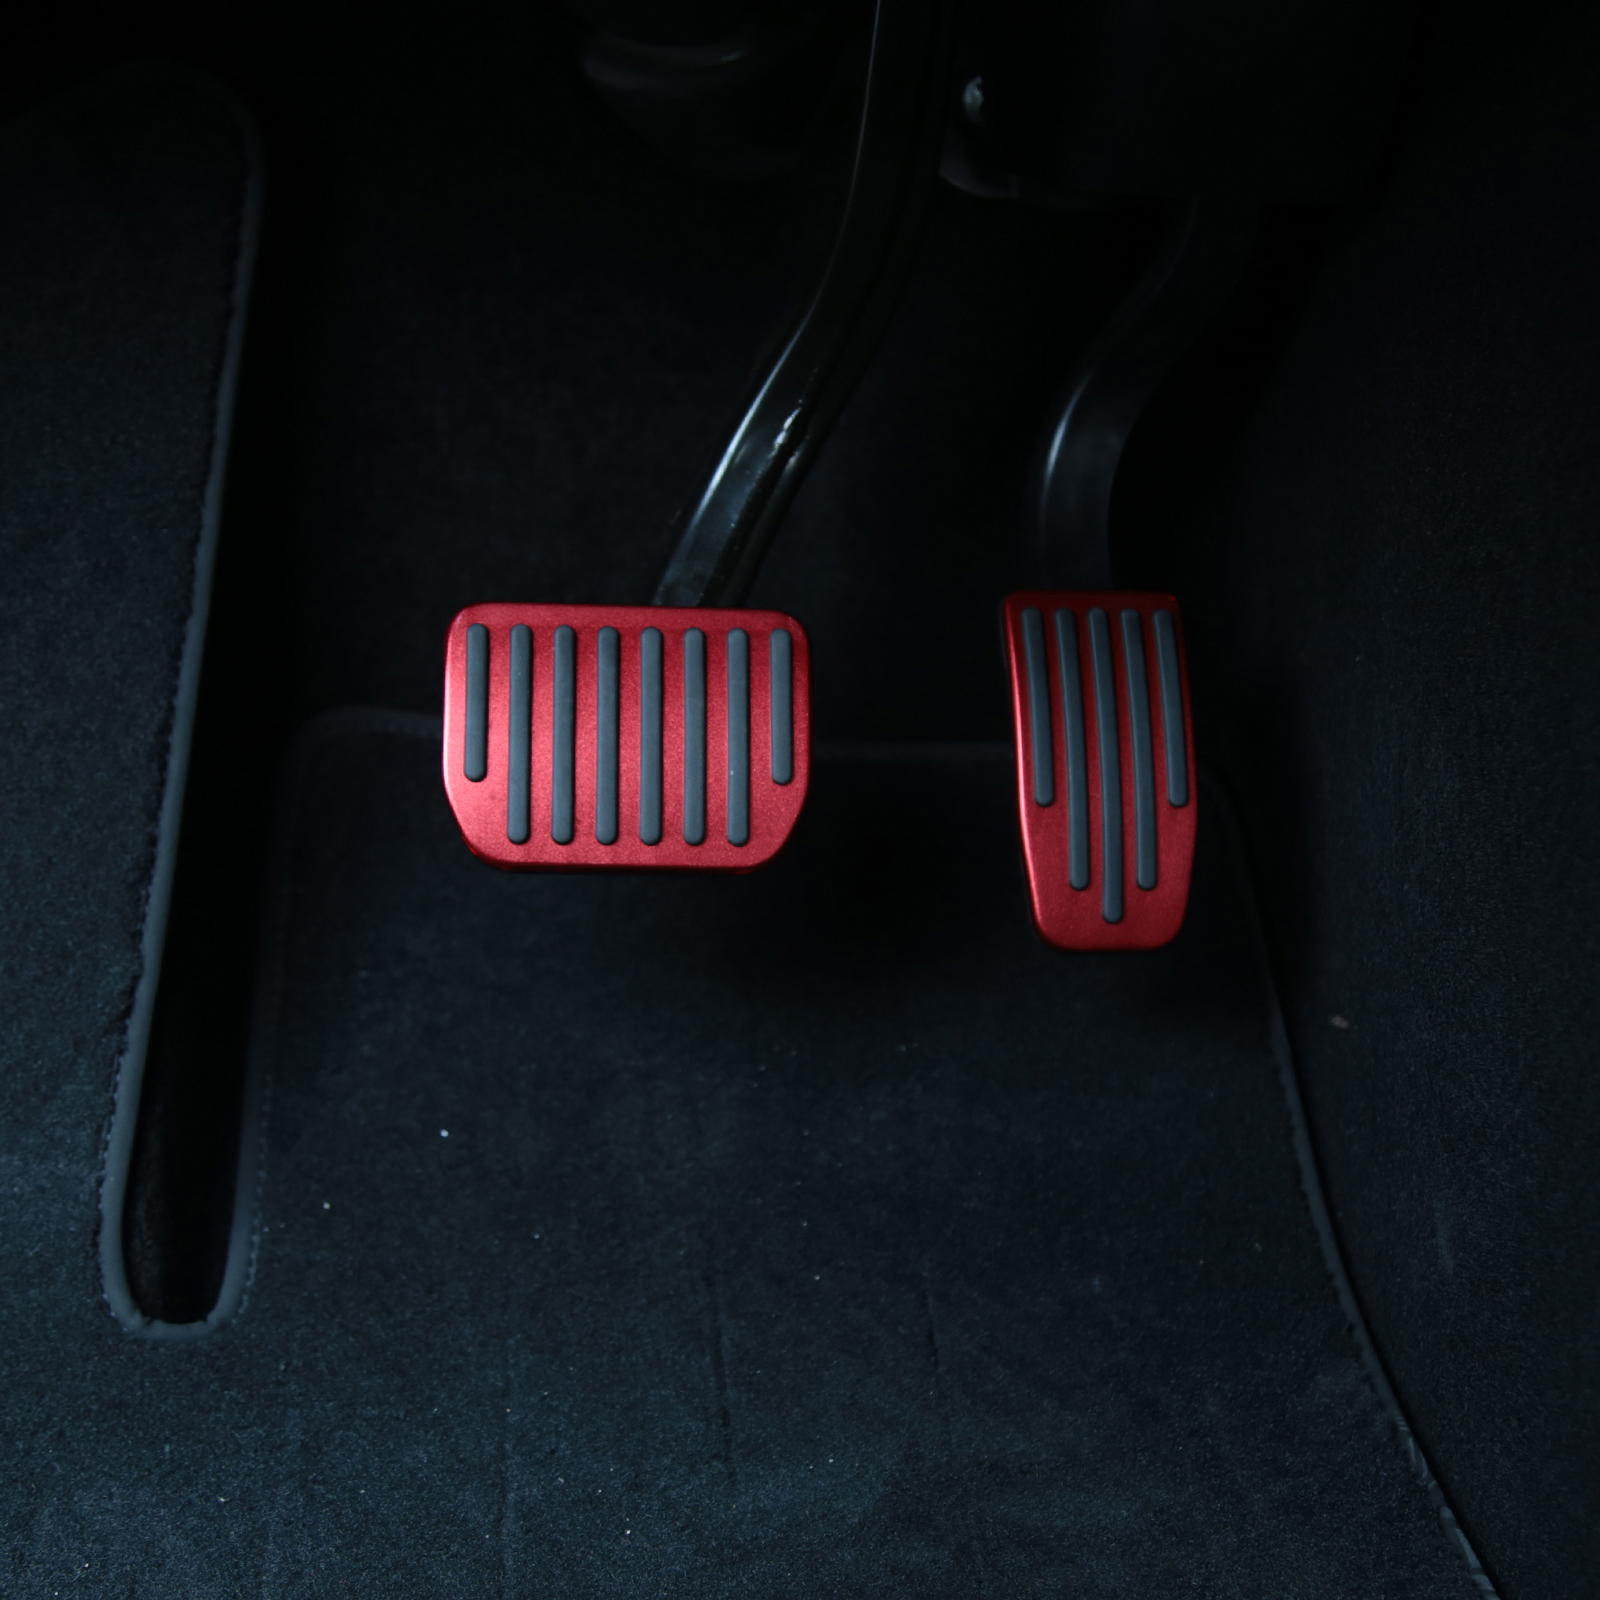 Car Foot Pedal Pads Covers for Tesla Model 3 Y Car Styling Set of 2 Red